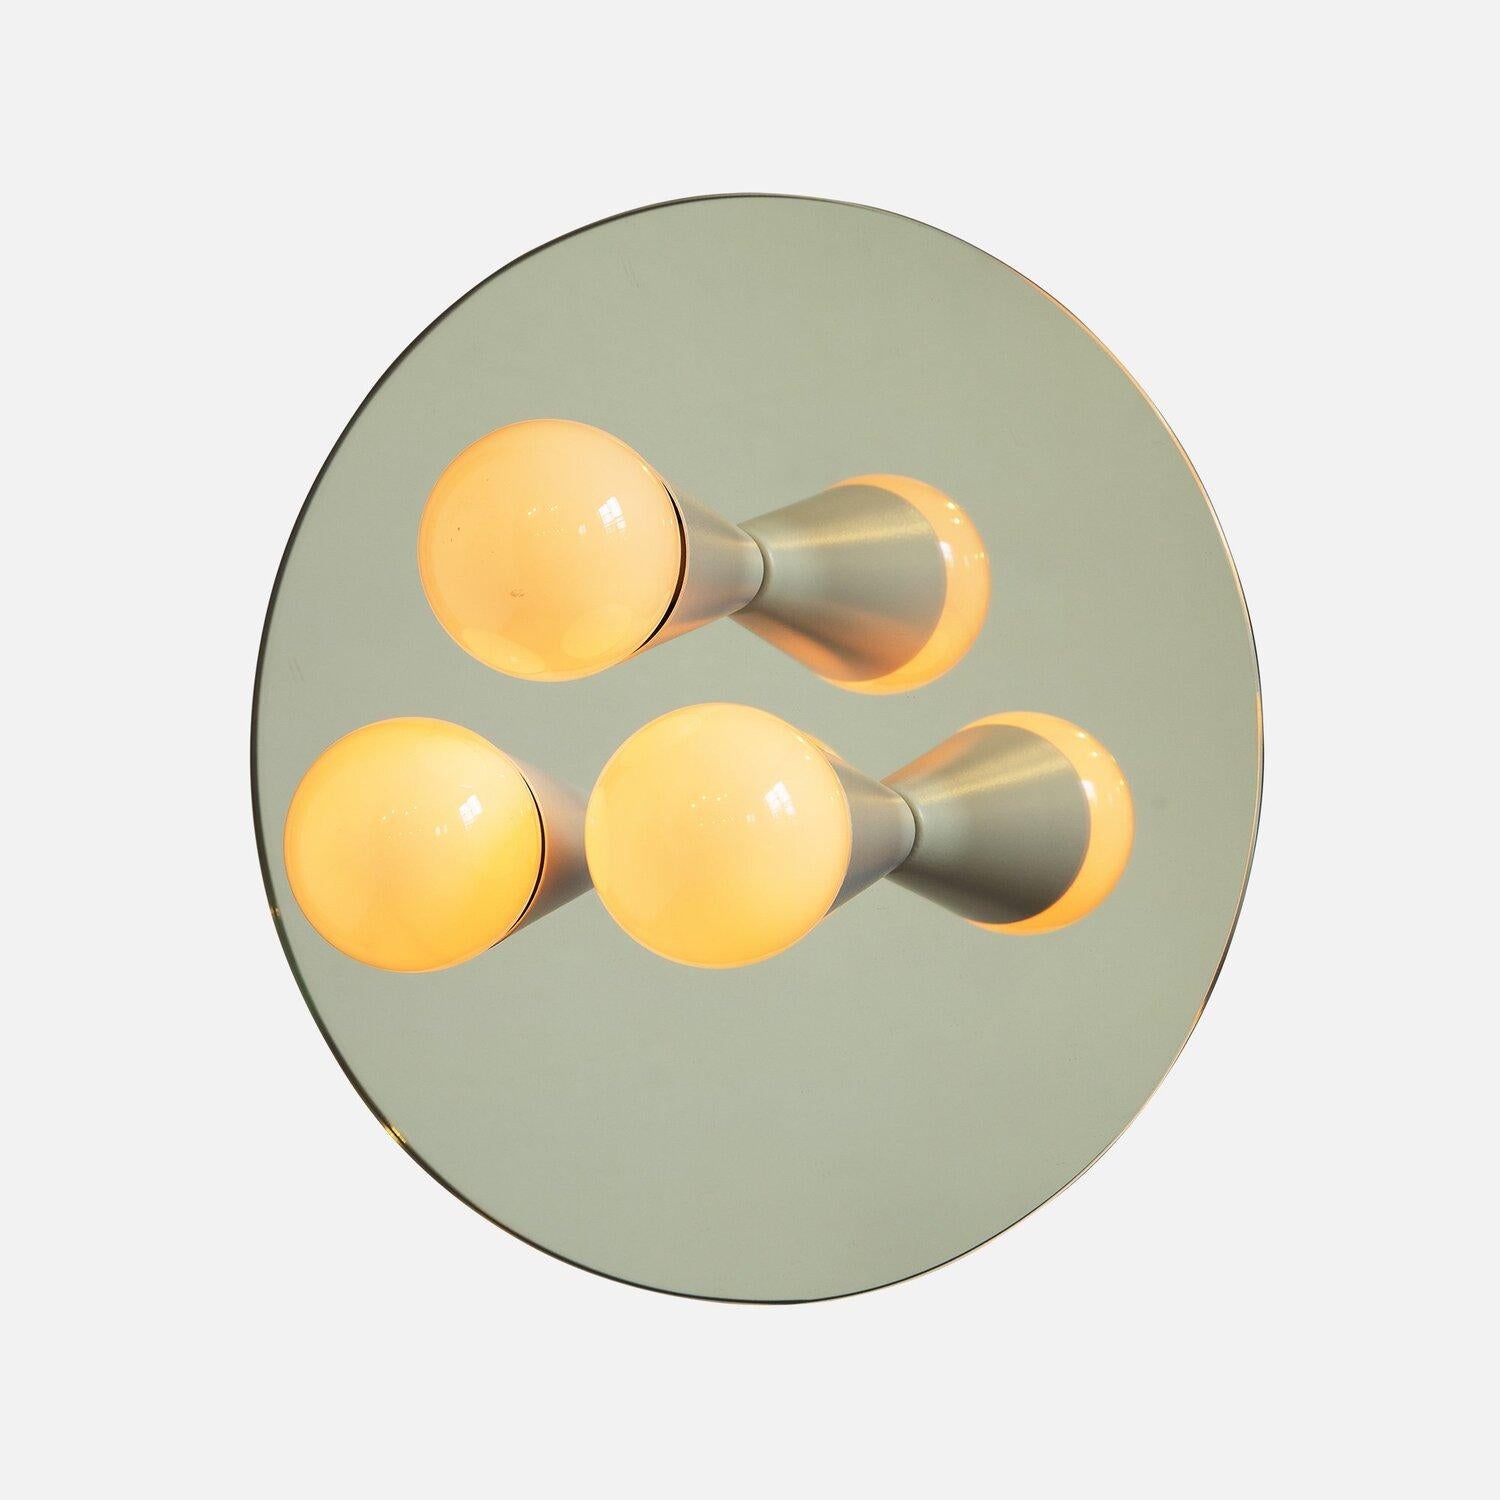 Designed by Shaun Kasperbauer for Souda

The Echo Series is a line of surface-mount fixtures that can be used on a wall or ceiling. White or brass cones mount to mirrored glass to perfectly reflect each bulb, giving the illusion of lights floating